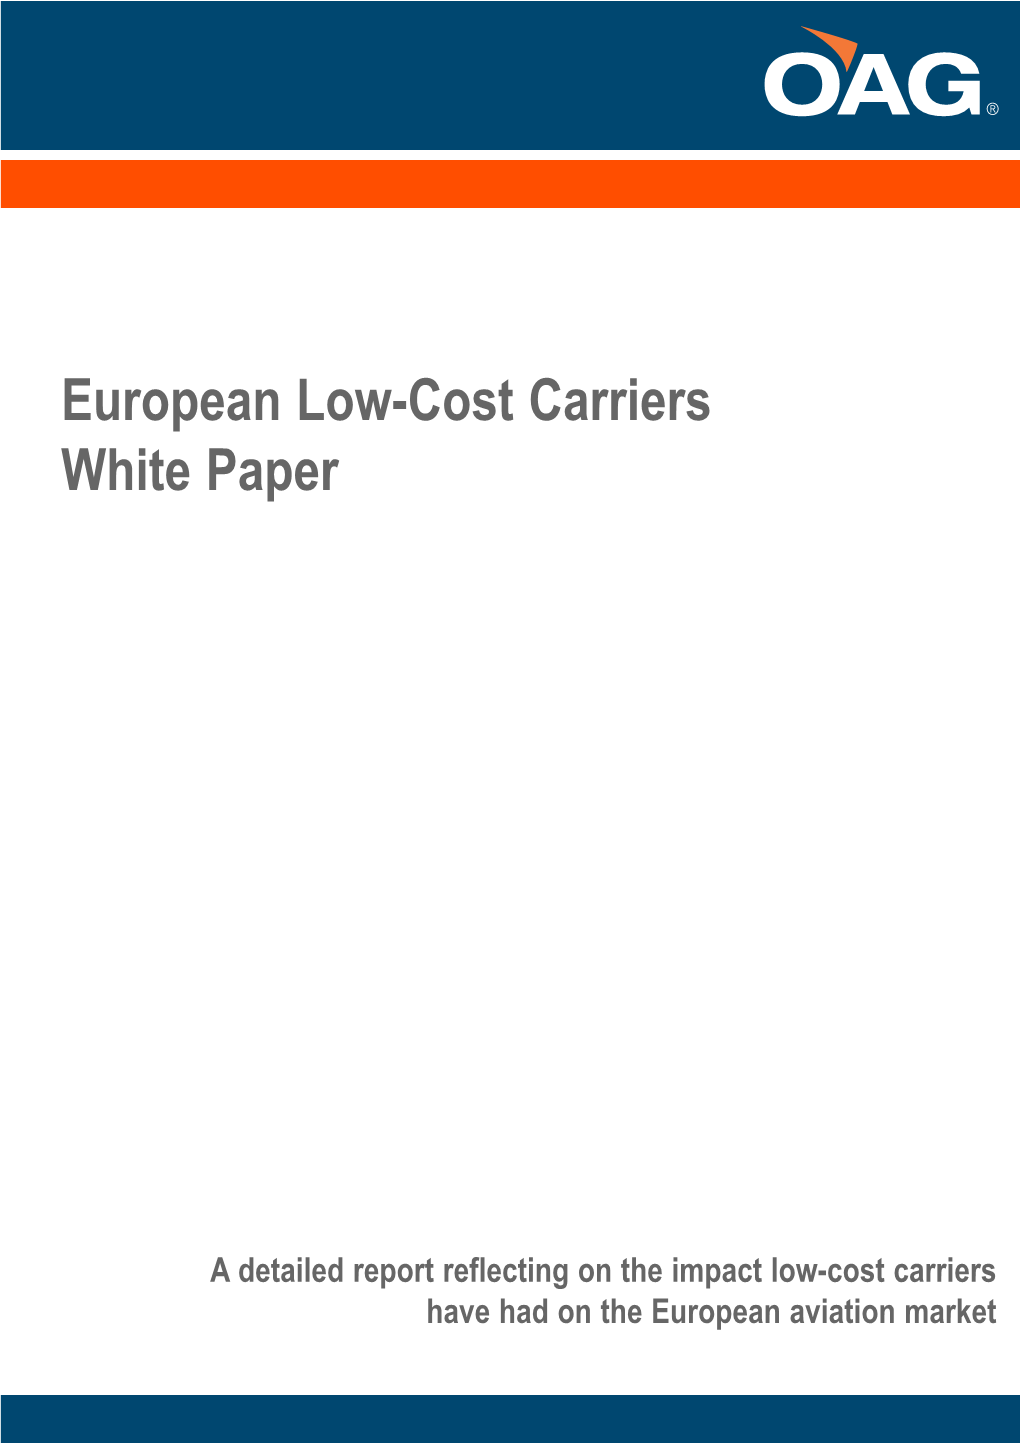 European Low-Cost Carriers White Paper